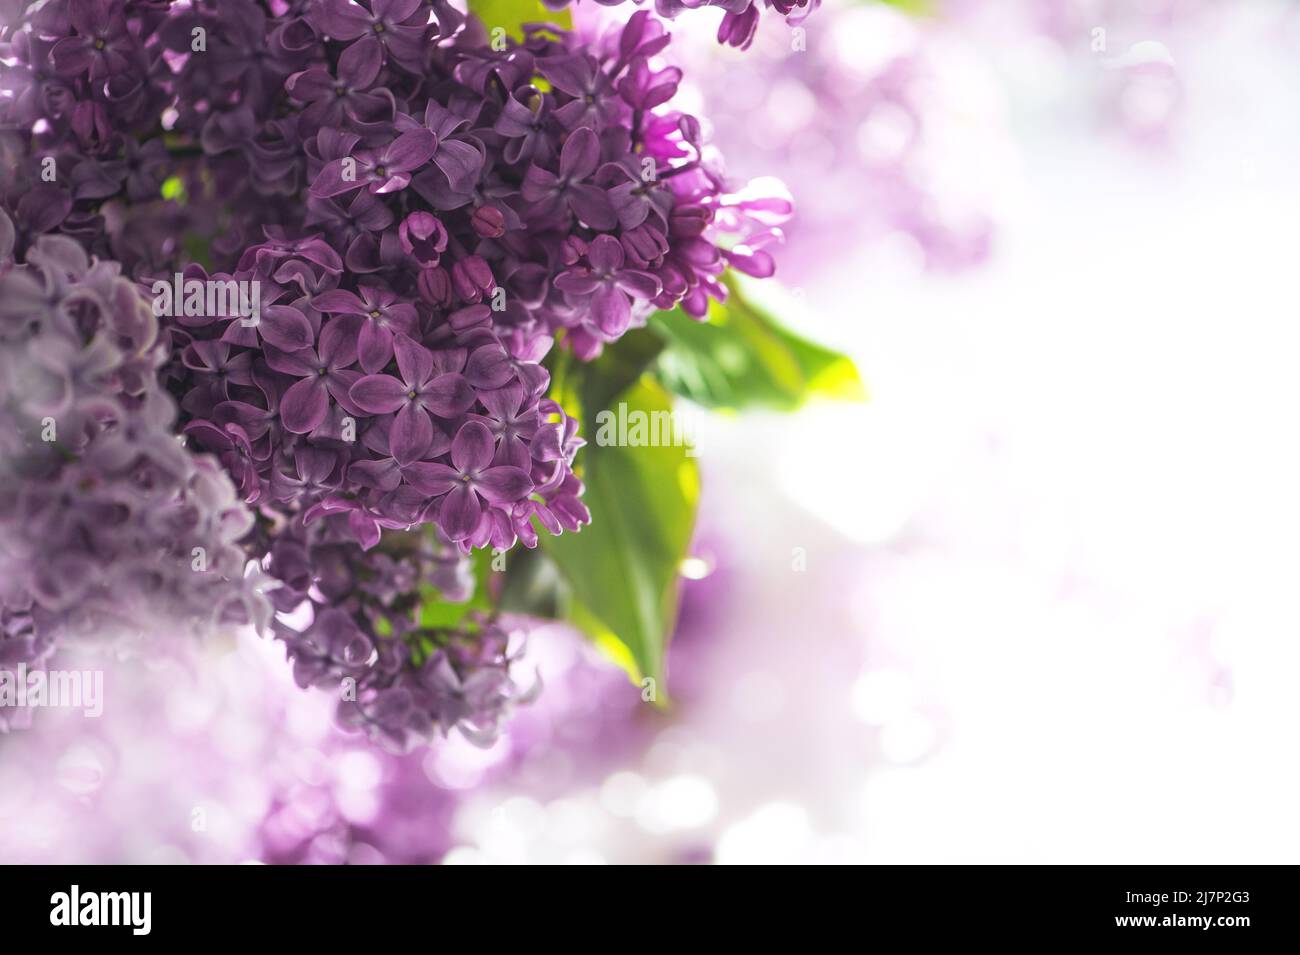 Lilac flowers with green leaves. Nature background Stock Photo